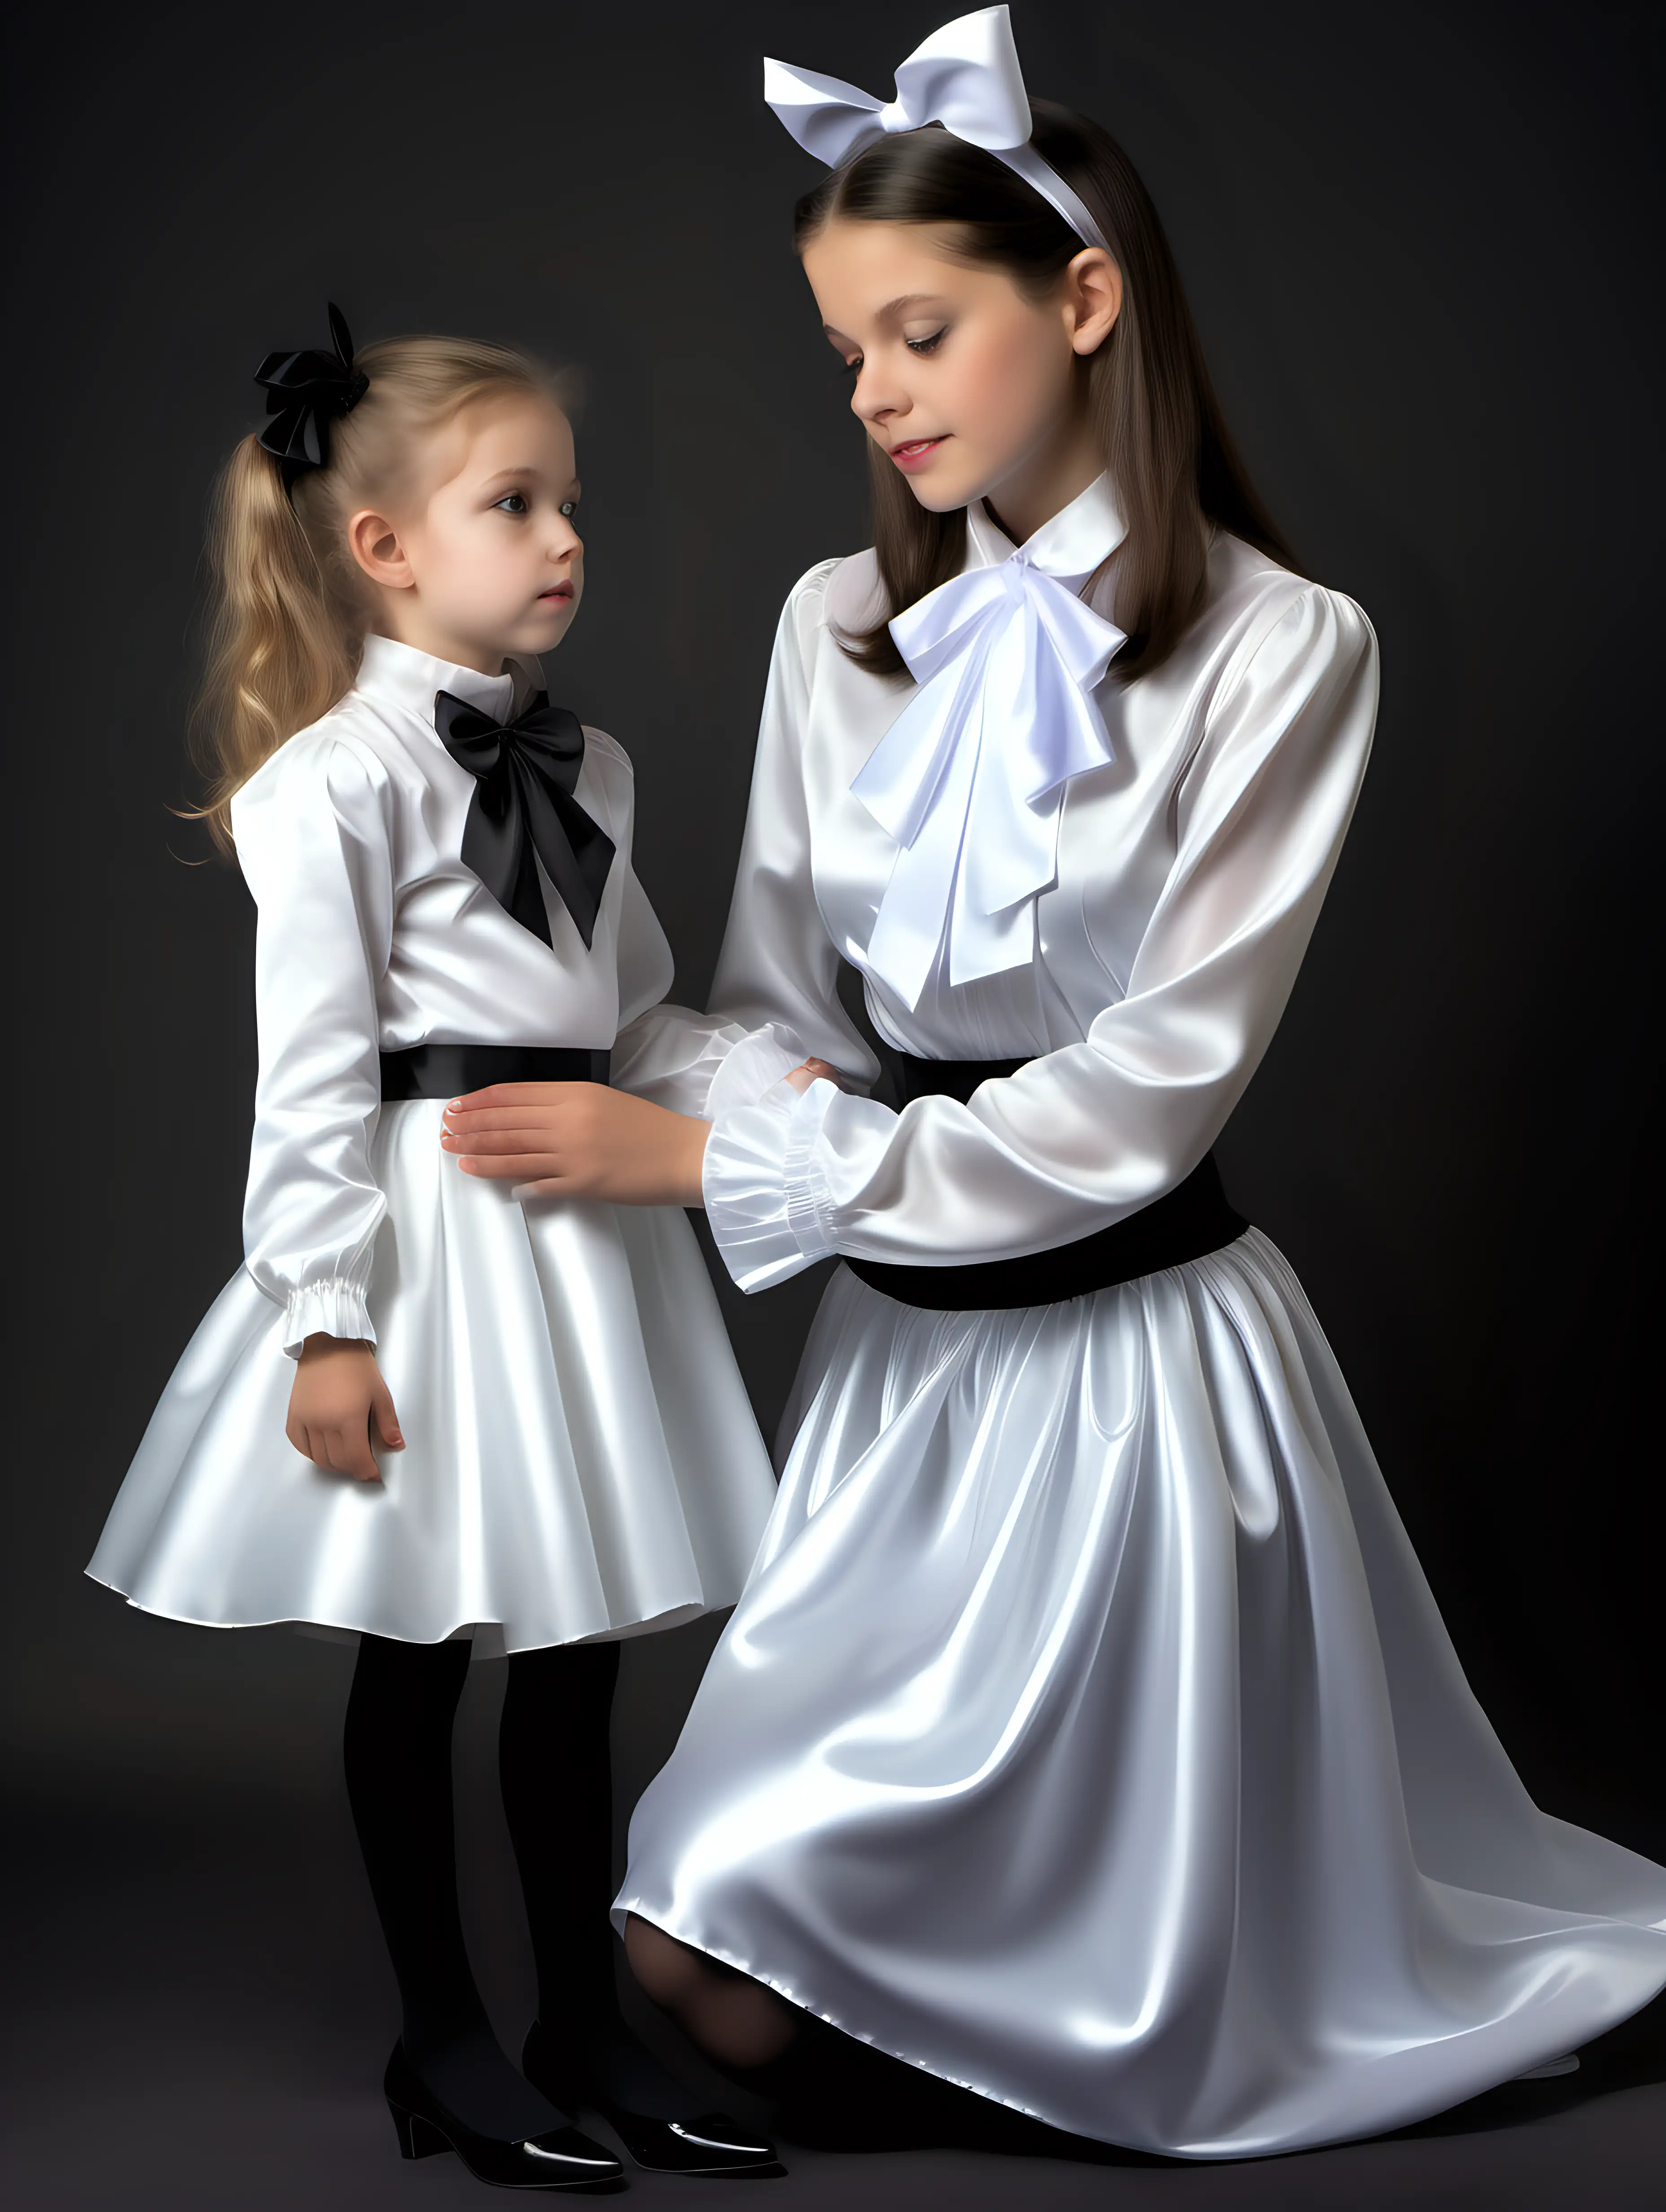 portrait of Little Girl 8 years old wearing a white satin long-sleeve blouse with big ribbon-bow collar and softly gathered white satin skirt kneels on both knees before her fairy godmother wearing a short black satin dress with high collar-bow around neck and long sleeves full body profile, with mother in faery costume with black pantyhose, high heels